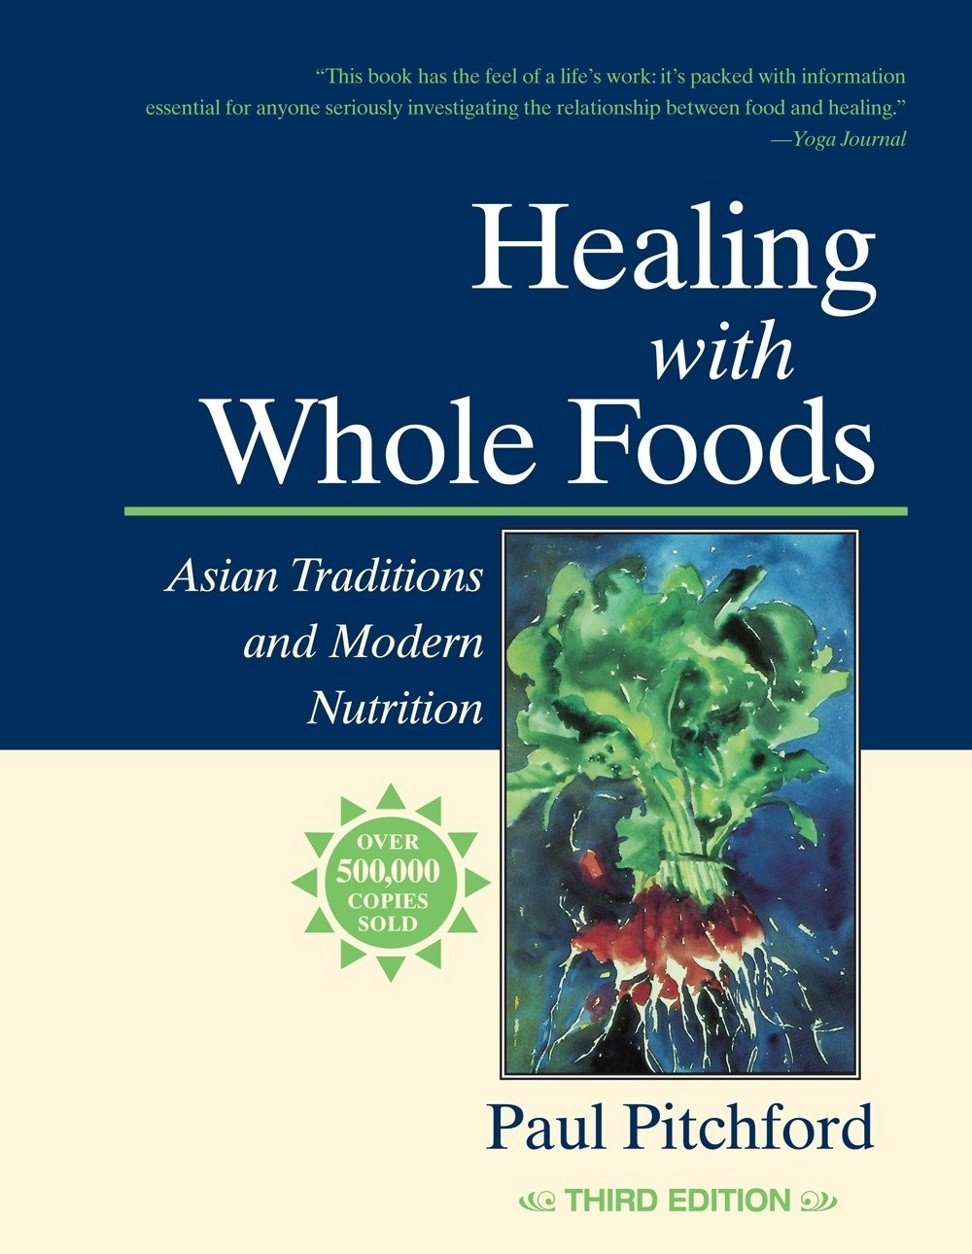 Healing with Whole Foods by Paul Pitchford.